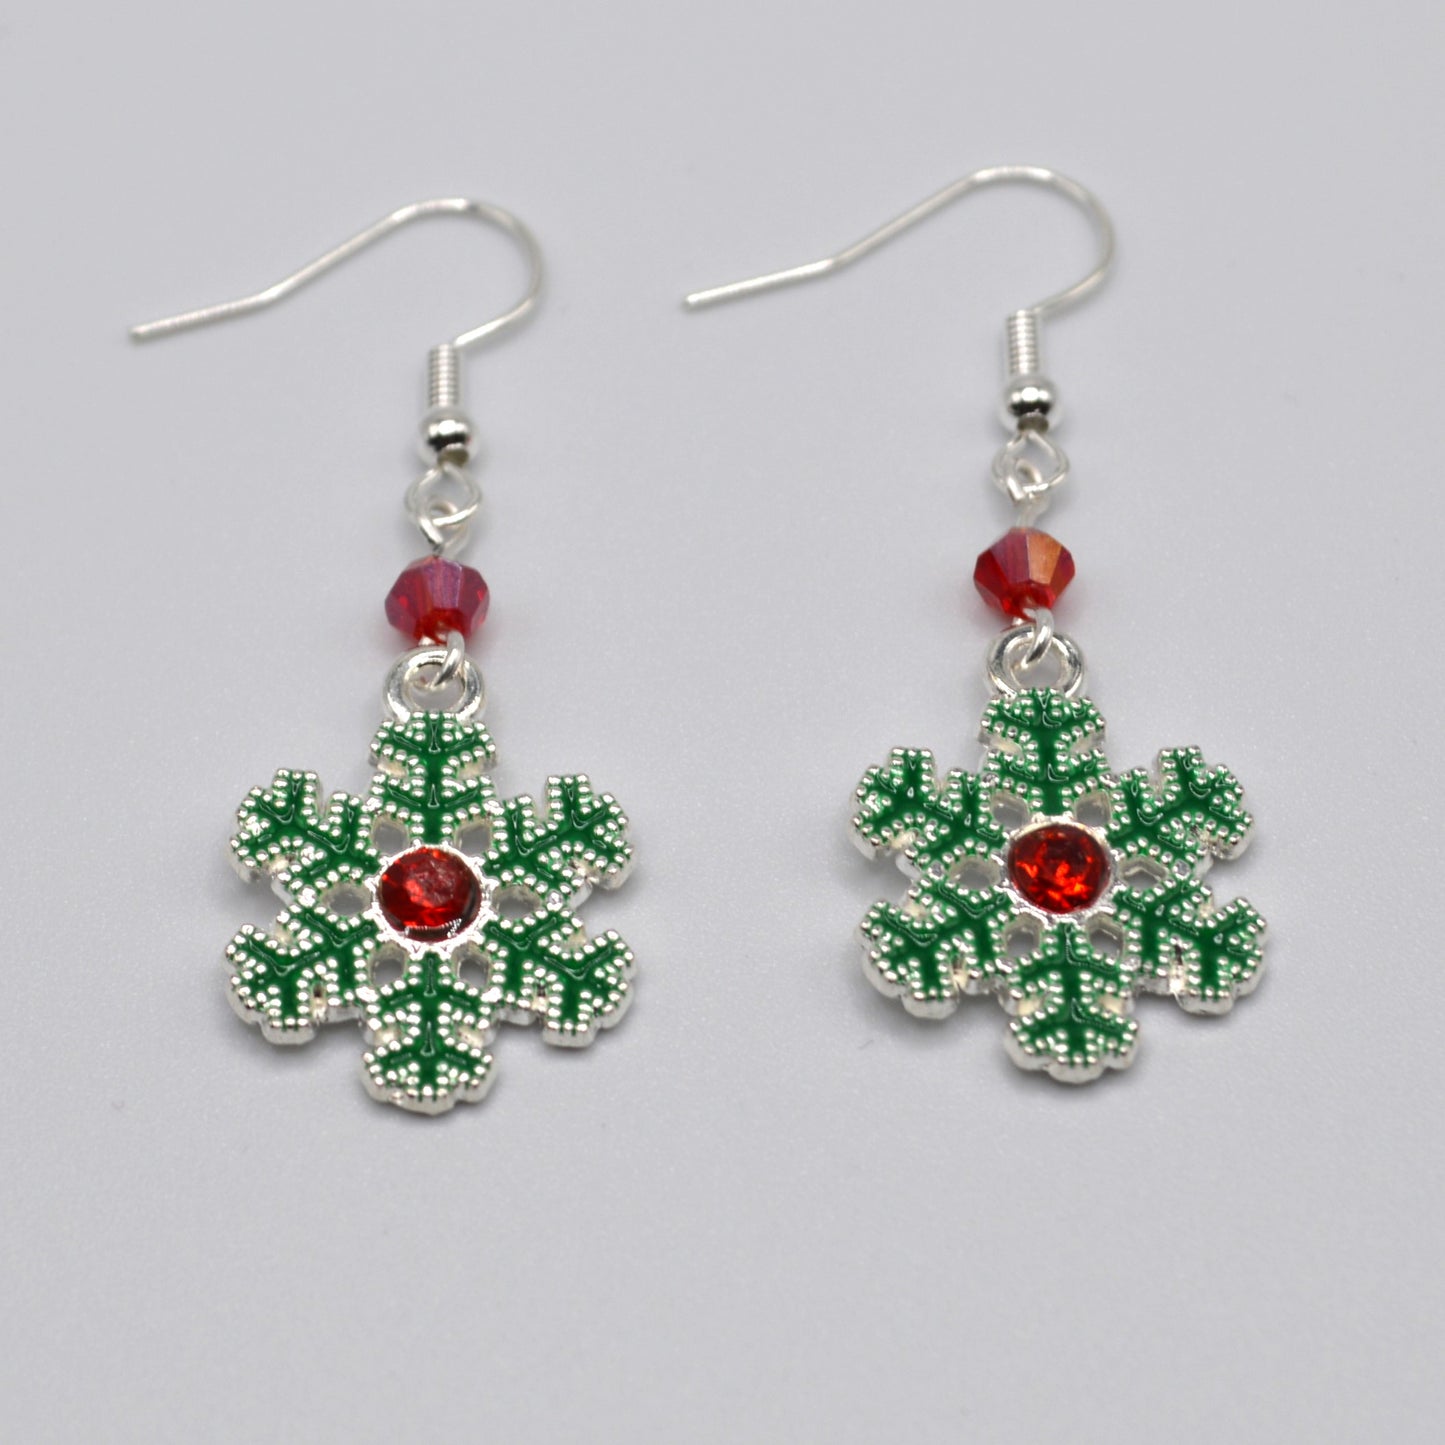 Snowflake Wreath with Red Crystals Silver Earrings